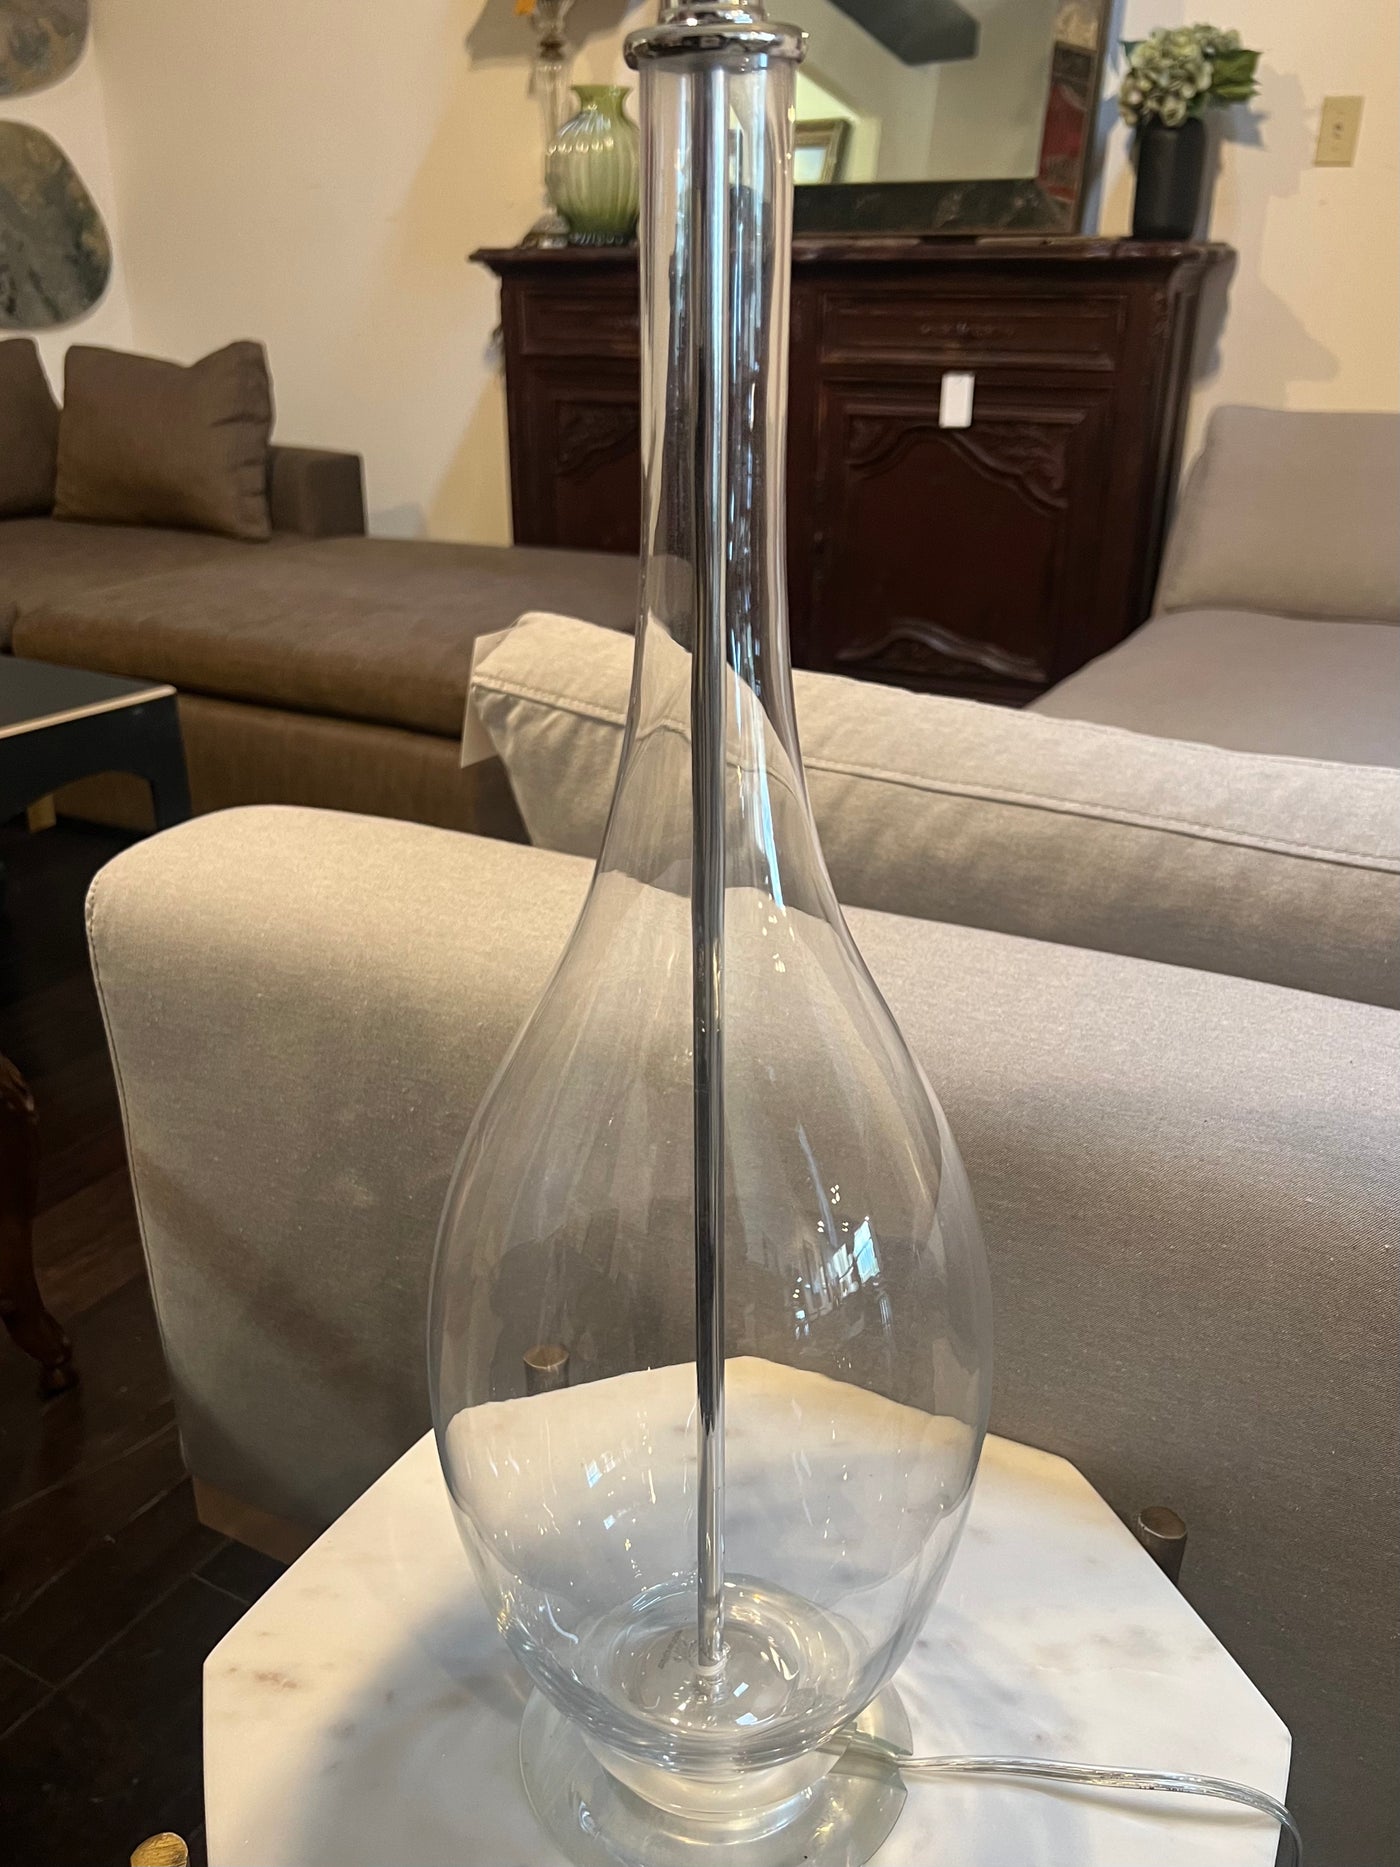 Contemporary Glass Table Lamp